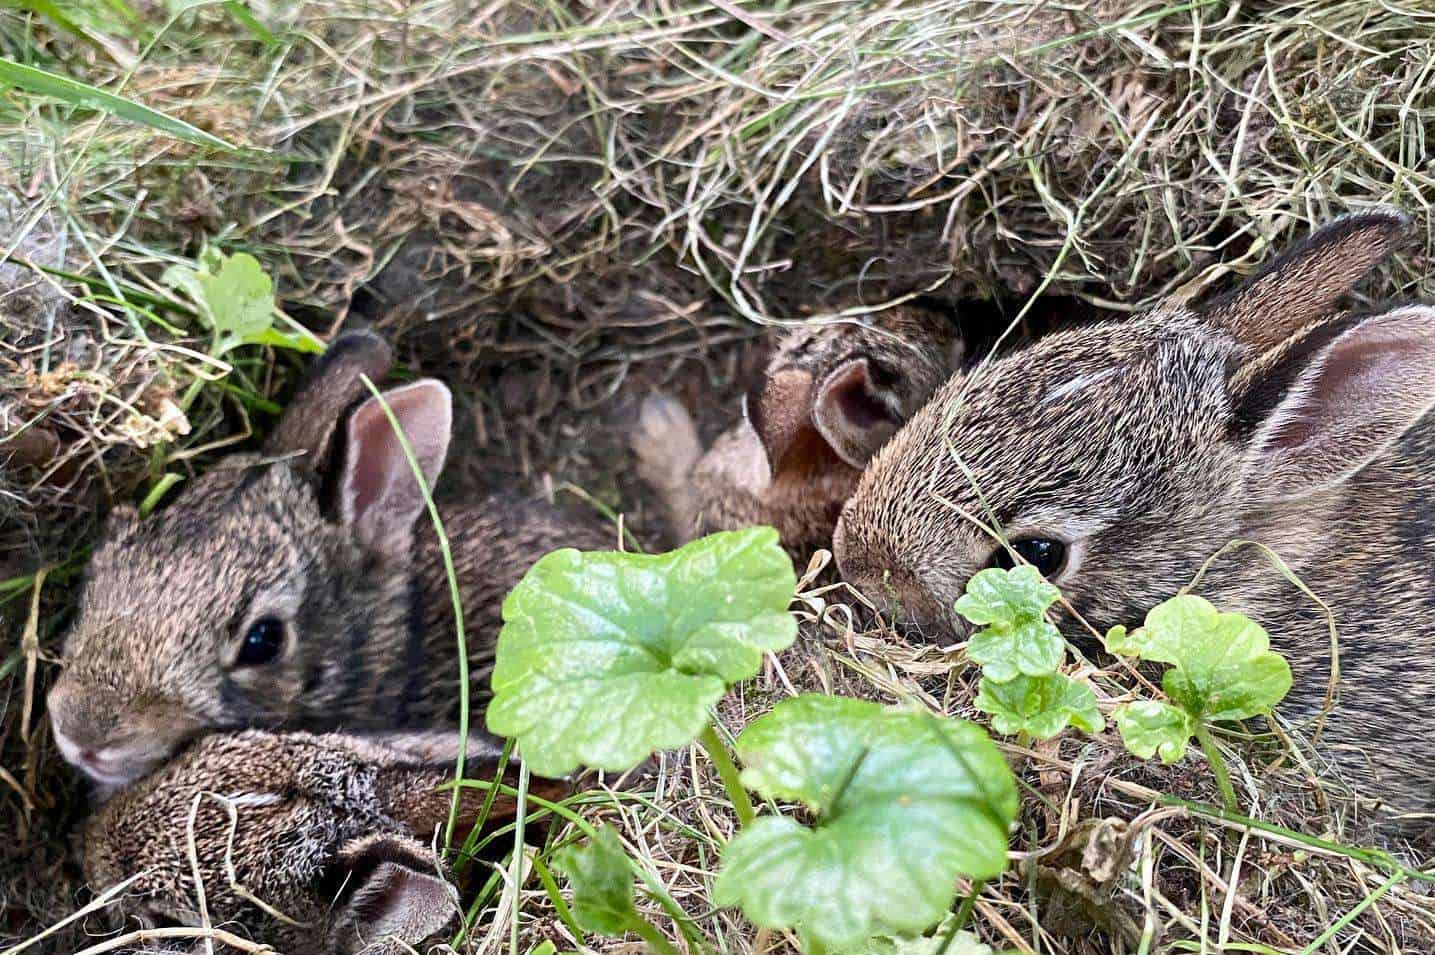 An Overview on the Nesting Process of Rabbits